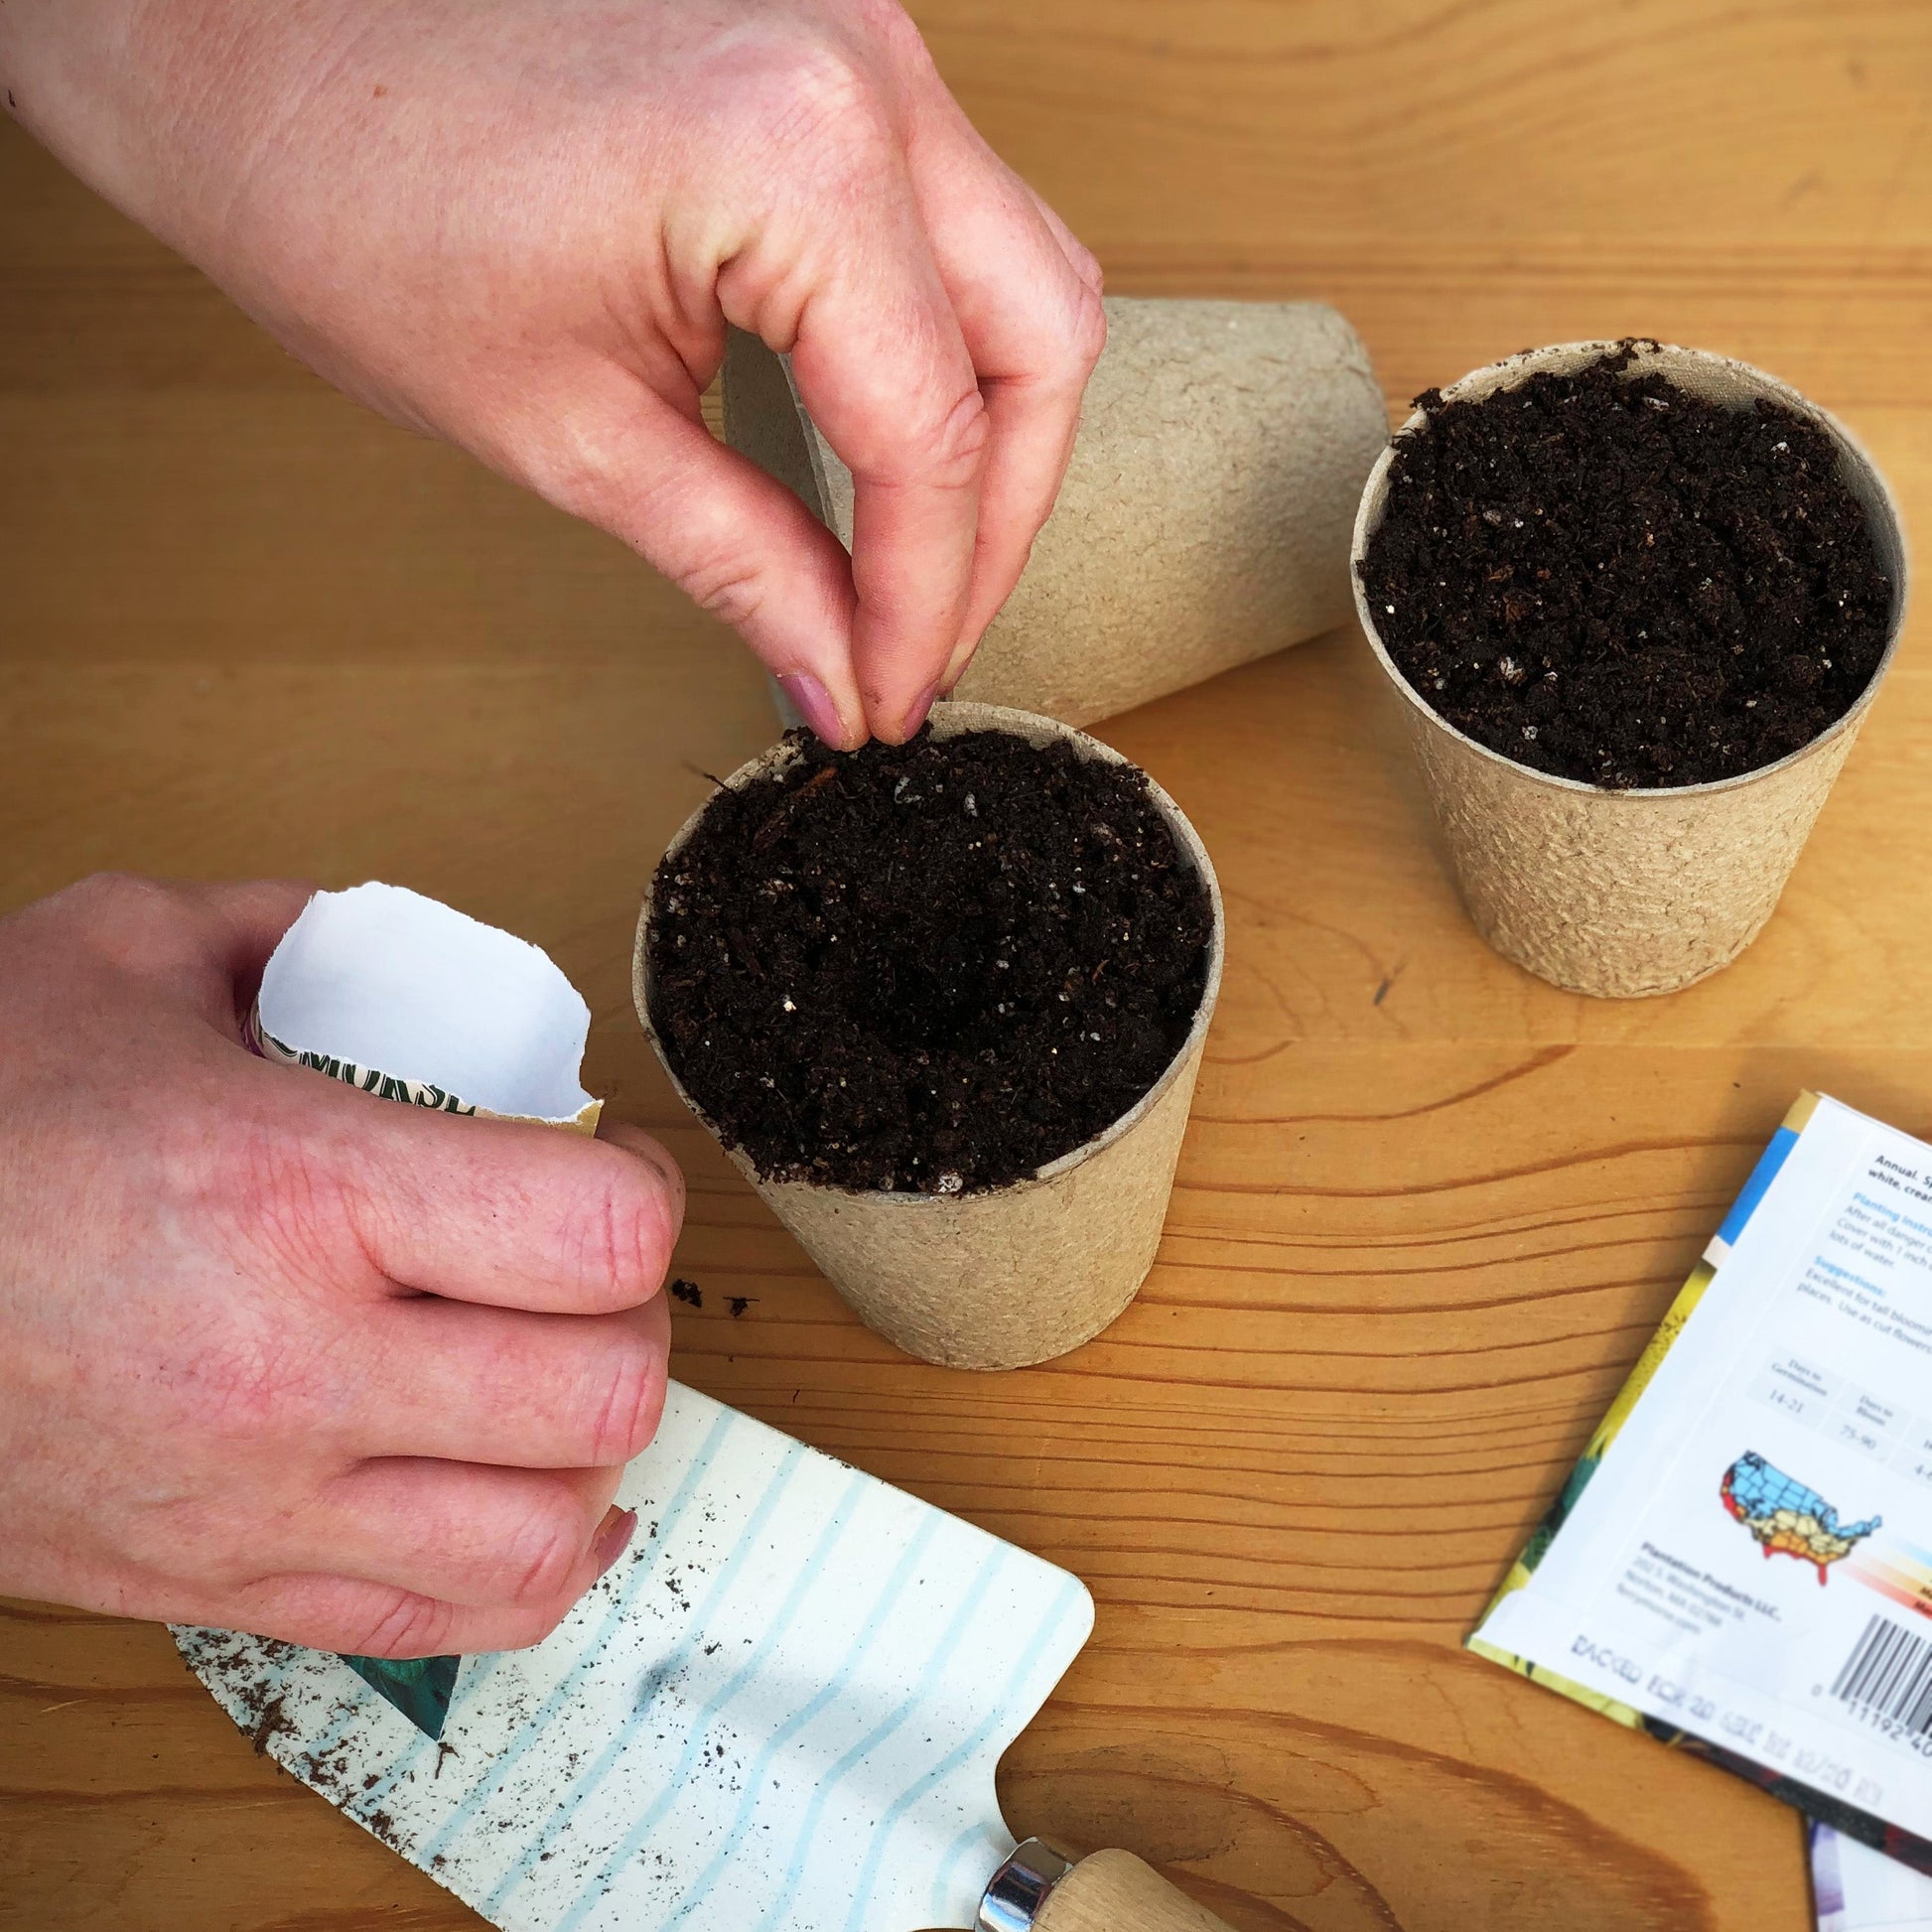 Start your Sweet Spanish Yellow Utah Jumbo Onion seeds in Jiffy biodegradable peat pots or paper pots filled with seed starting mix.